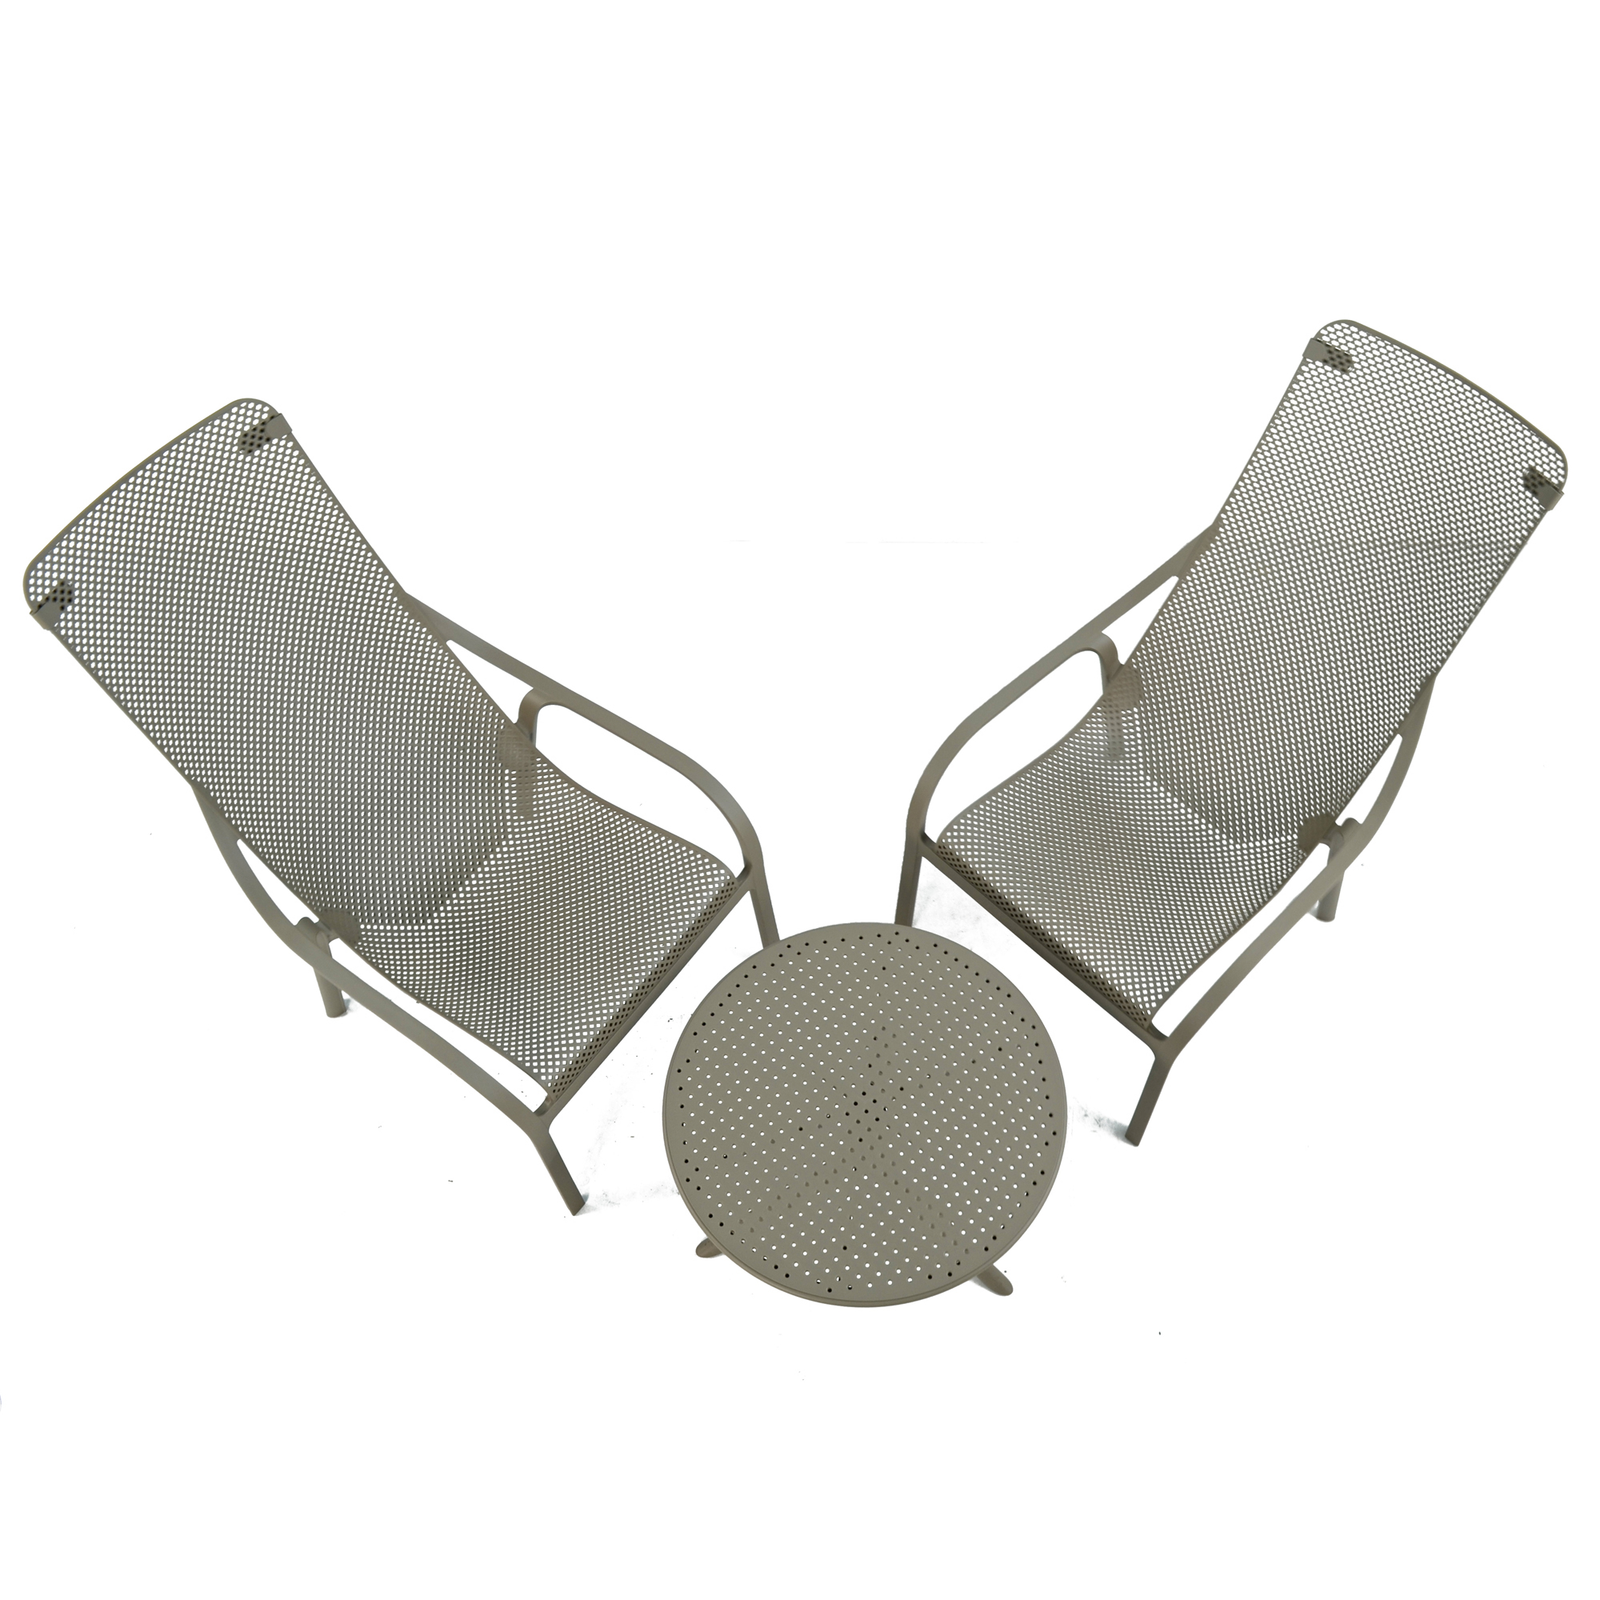 Nardi Step Low Garden Coffee Table With 2 Net Lounge Chair Set in Turtle Dove Grey Dining Sets Nardi   